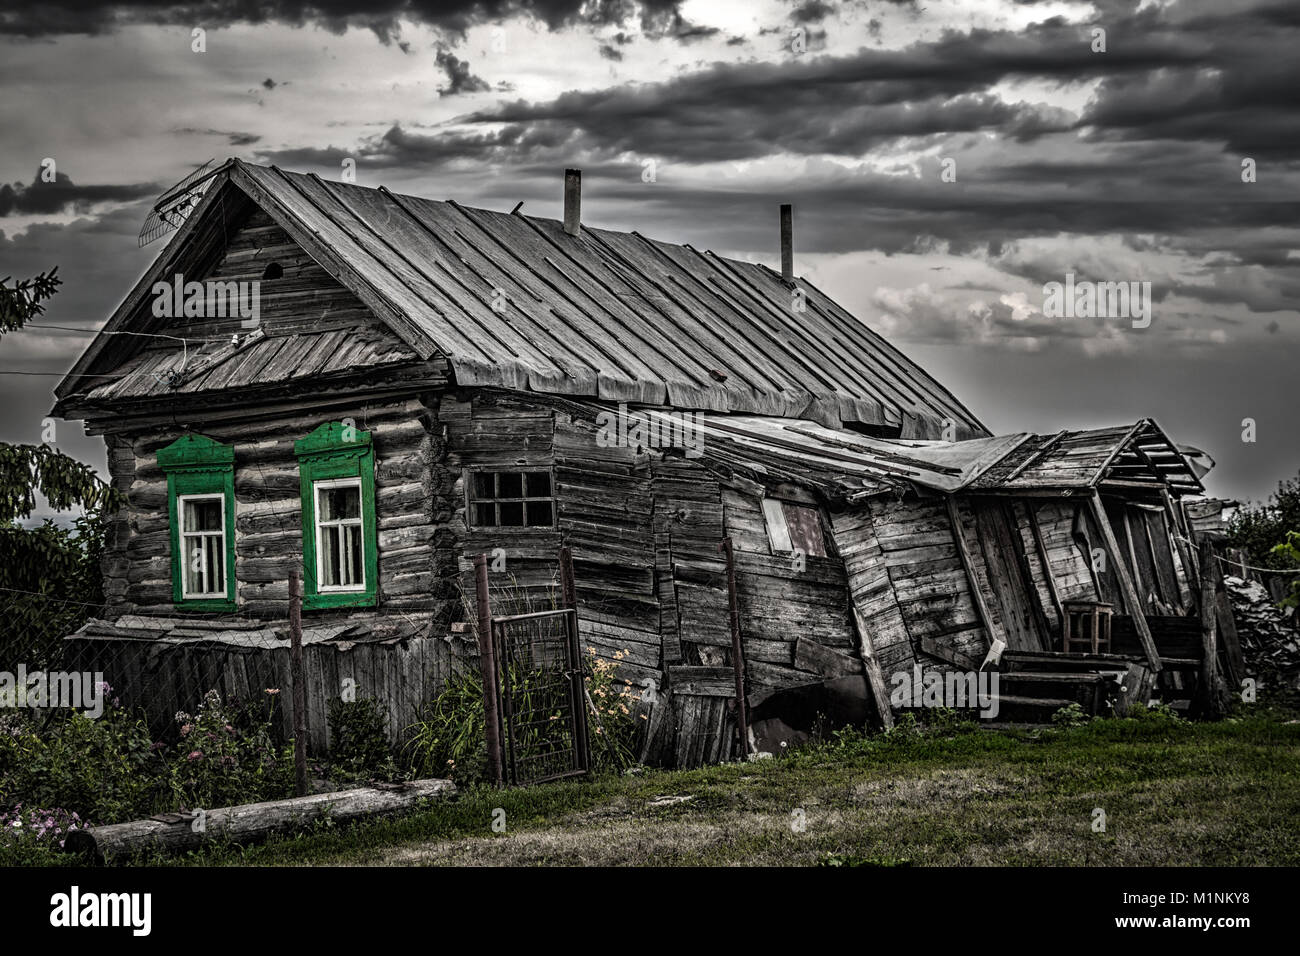 An old rickety dilapidated residential log wooden house. Stock Photo